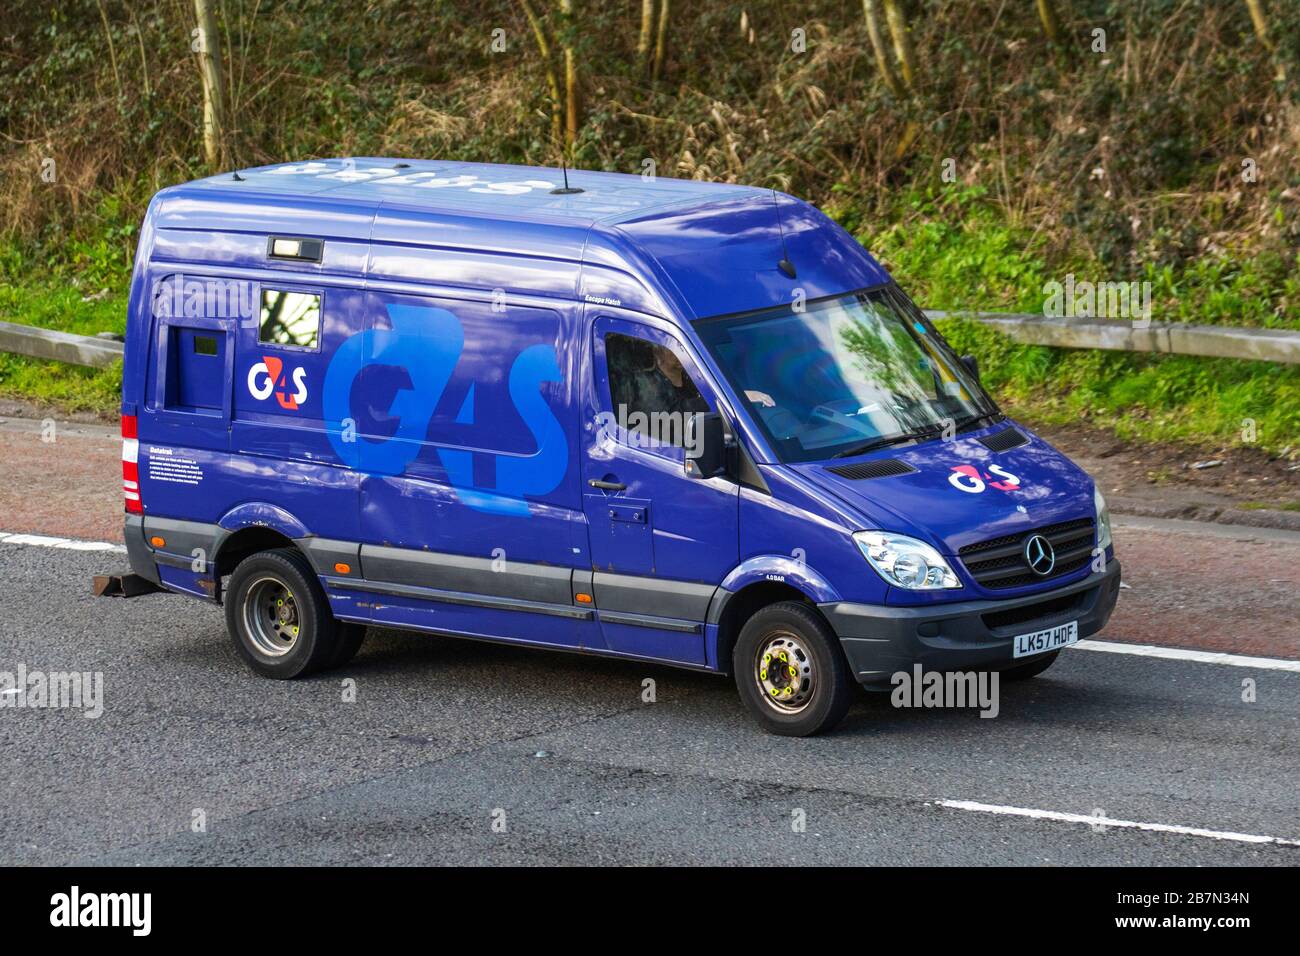 Blue Mercedes Benz G4s armoured security van driving on the M6 motorway, UK Stock Photo